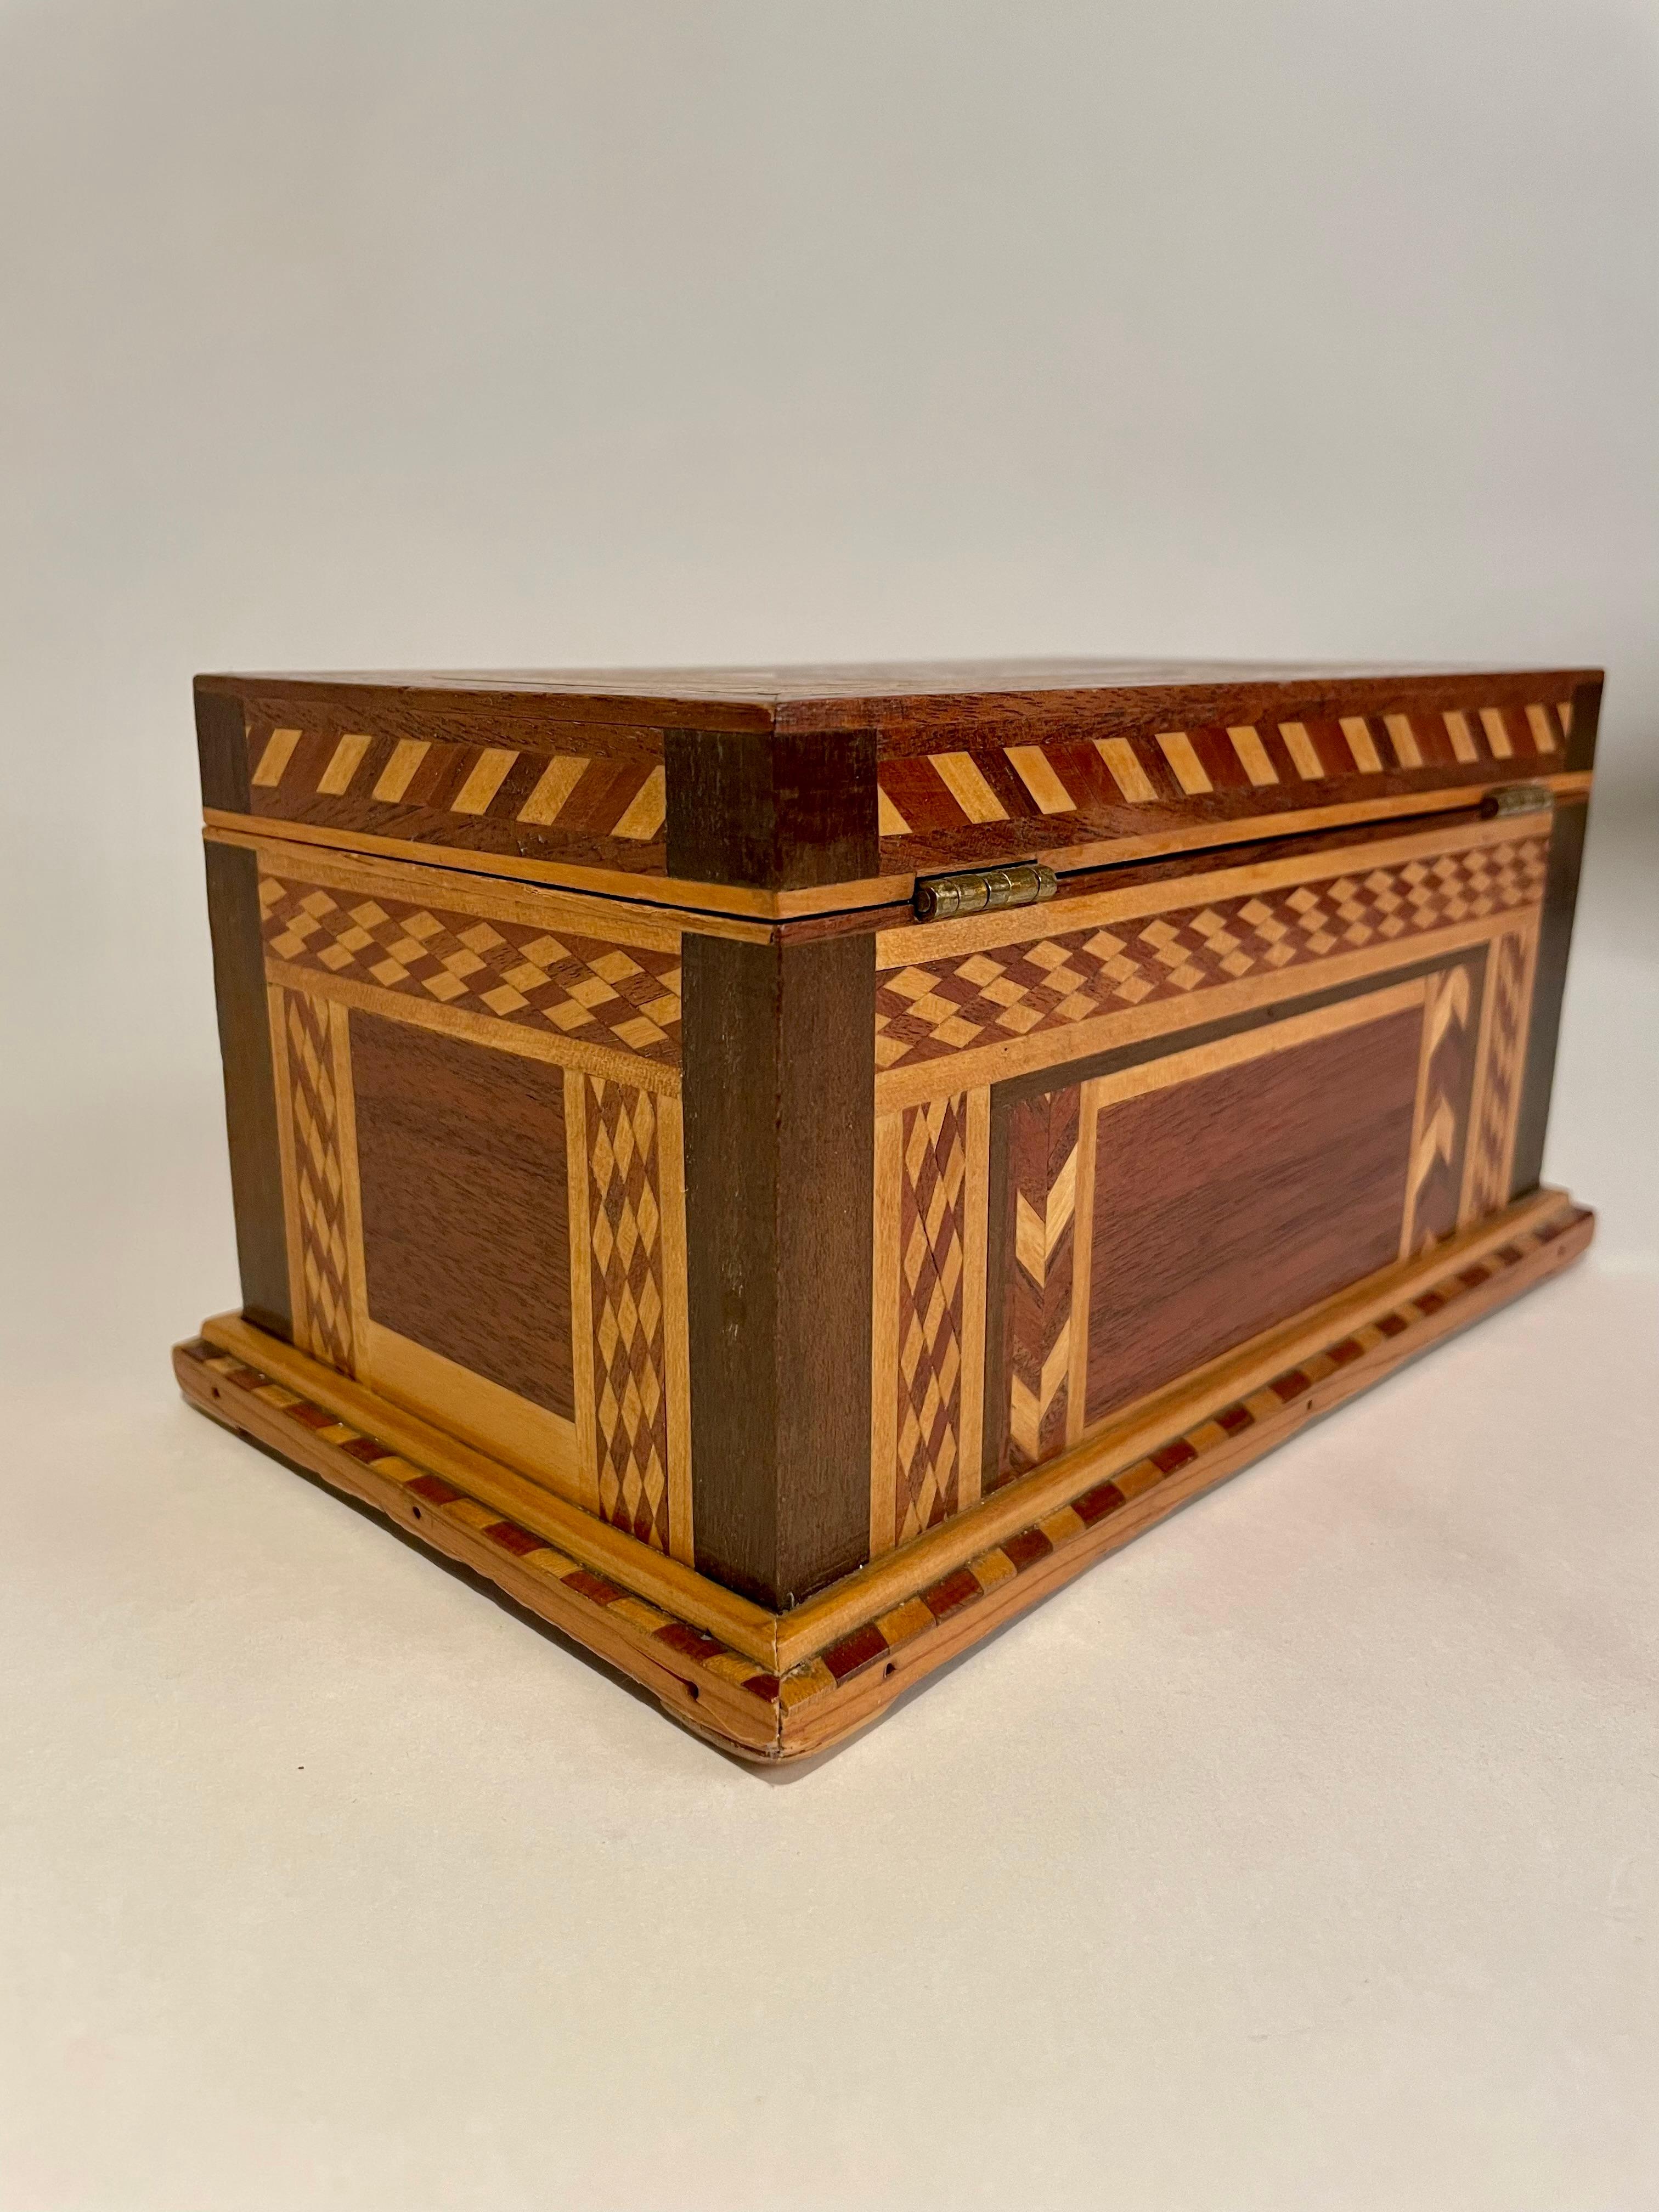 19th C American Walnut Box With Geometric And Starburst Fruitwood Inlay 3